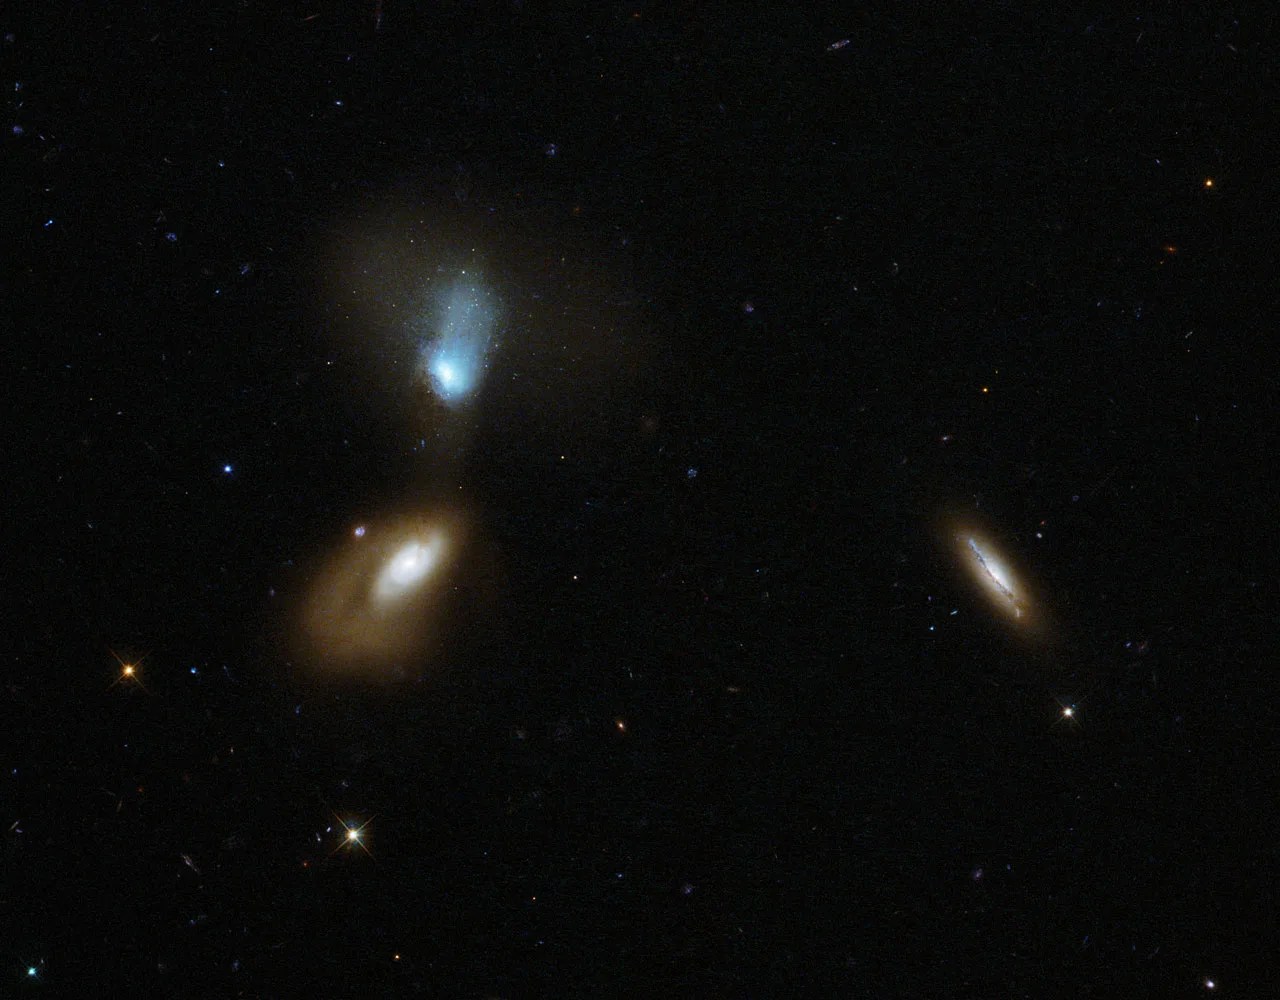 Three galaxies - two of which are visibly distorting each other